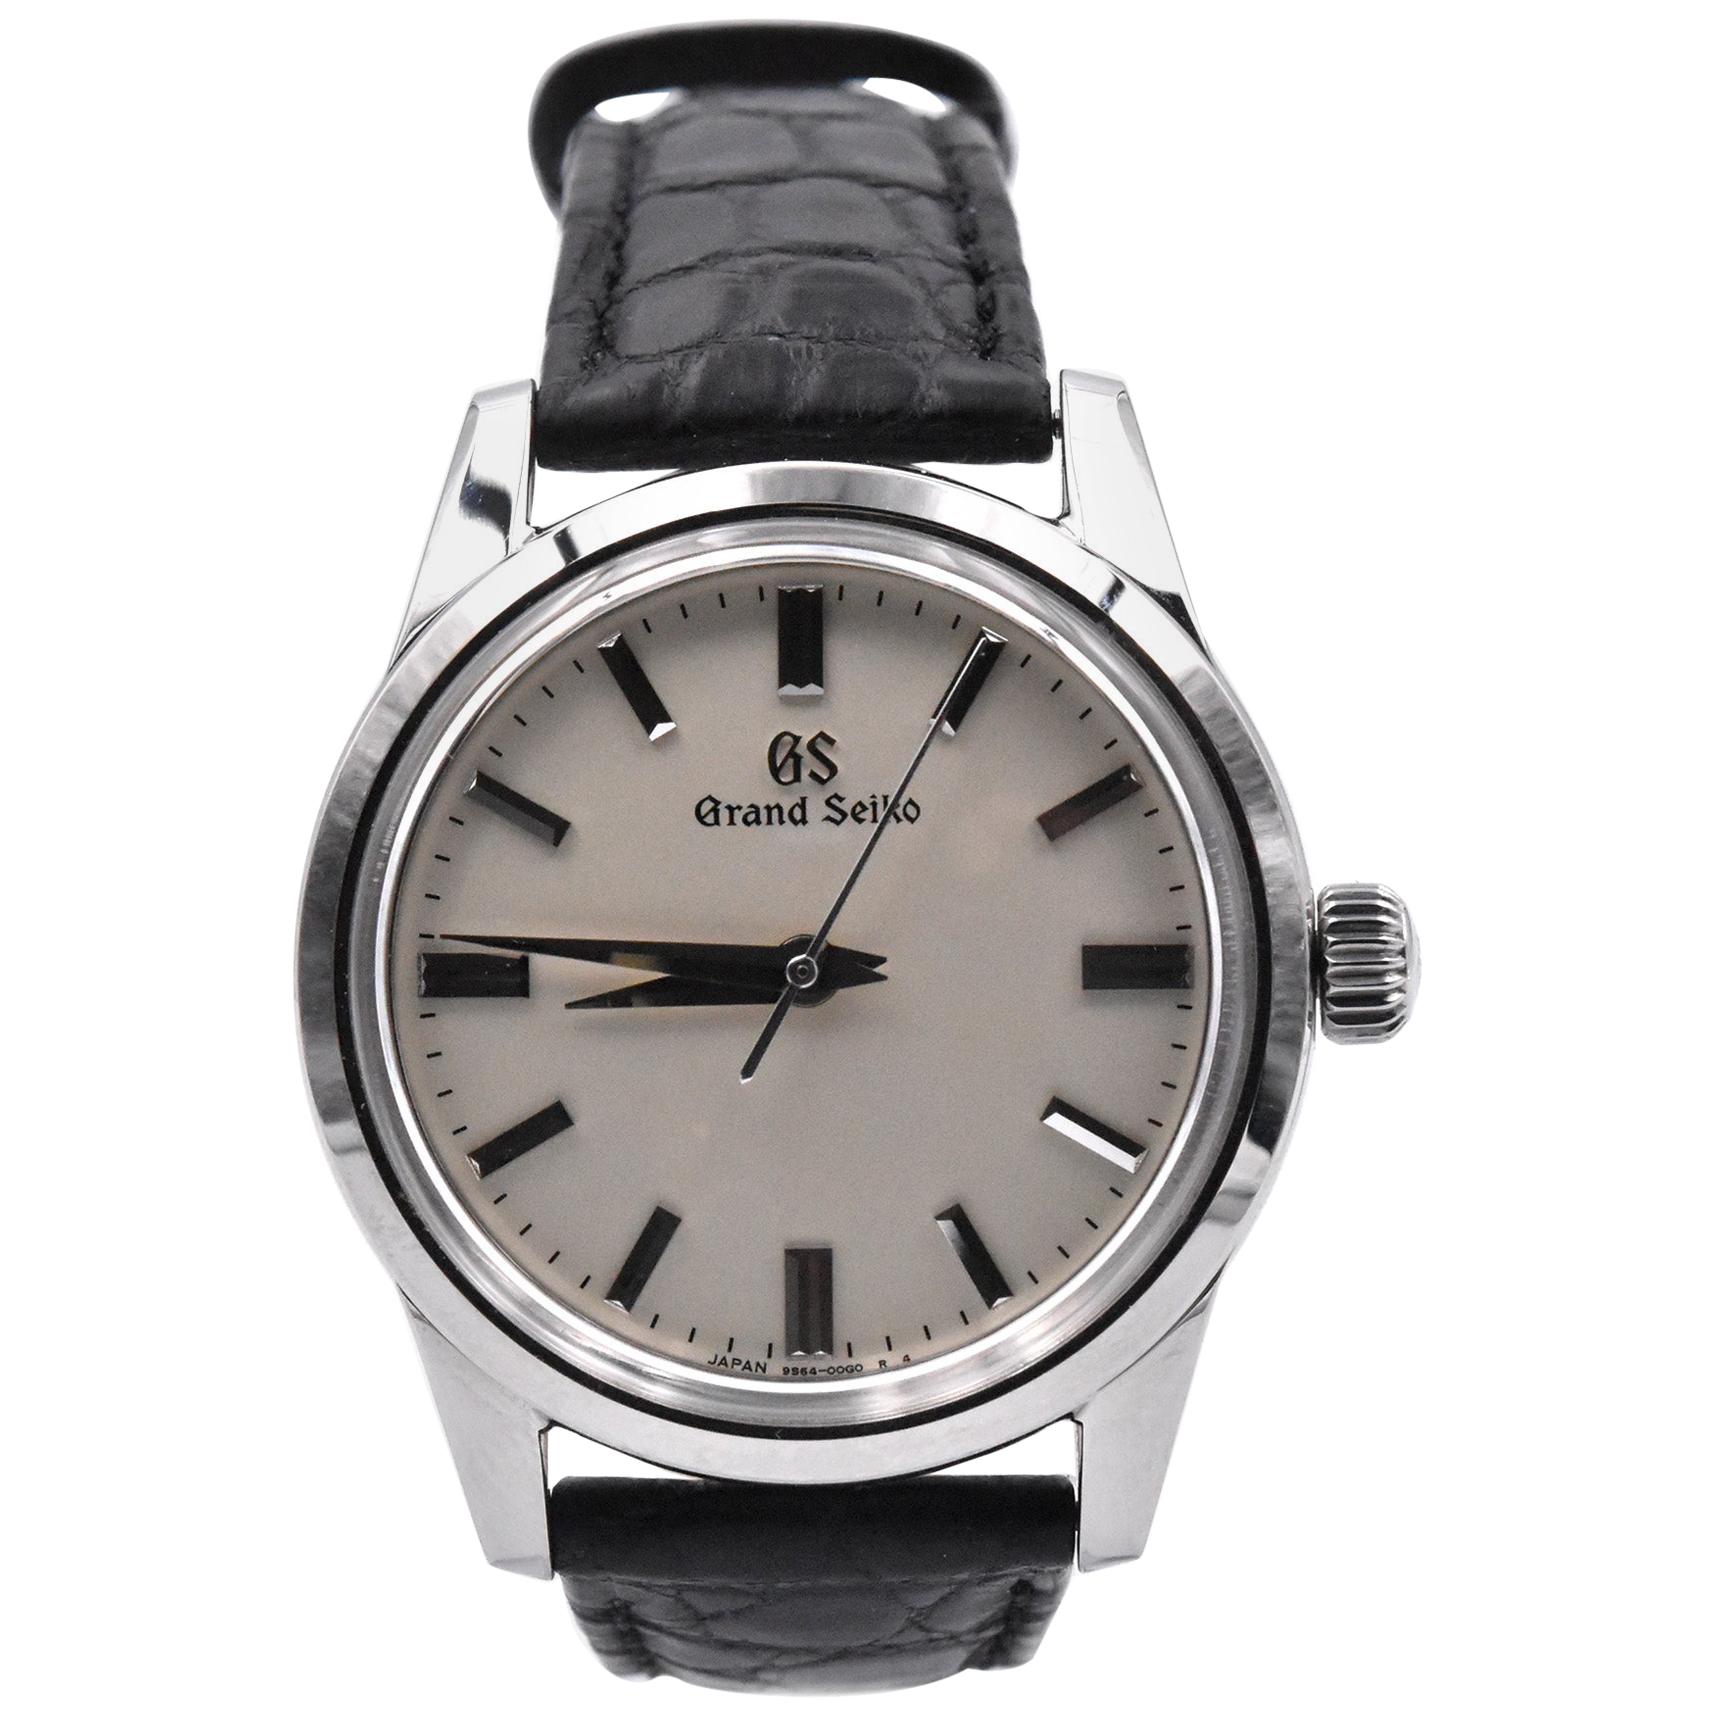 Grand Seiko Stainless Steel Elegance Collection Watch Ref. SBGW231